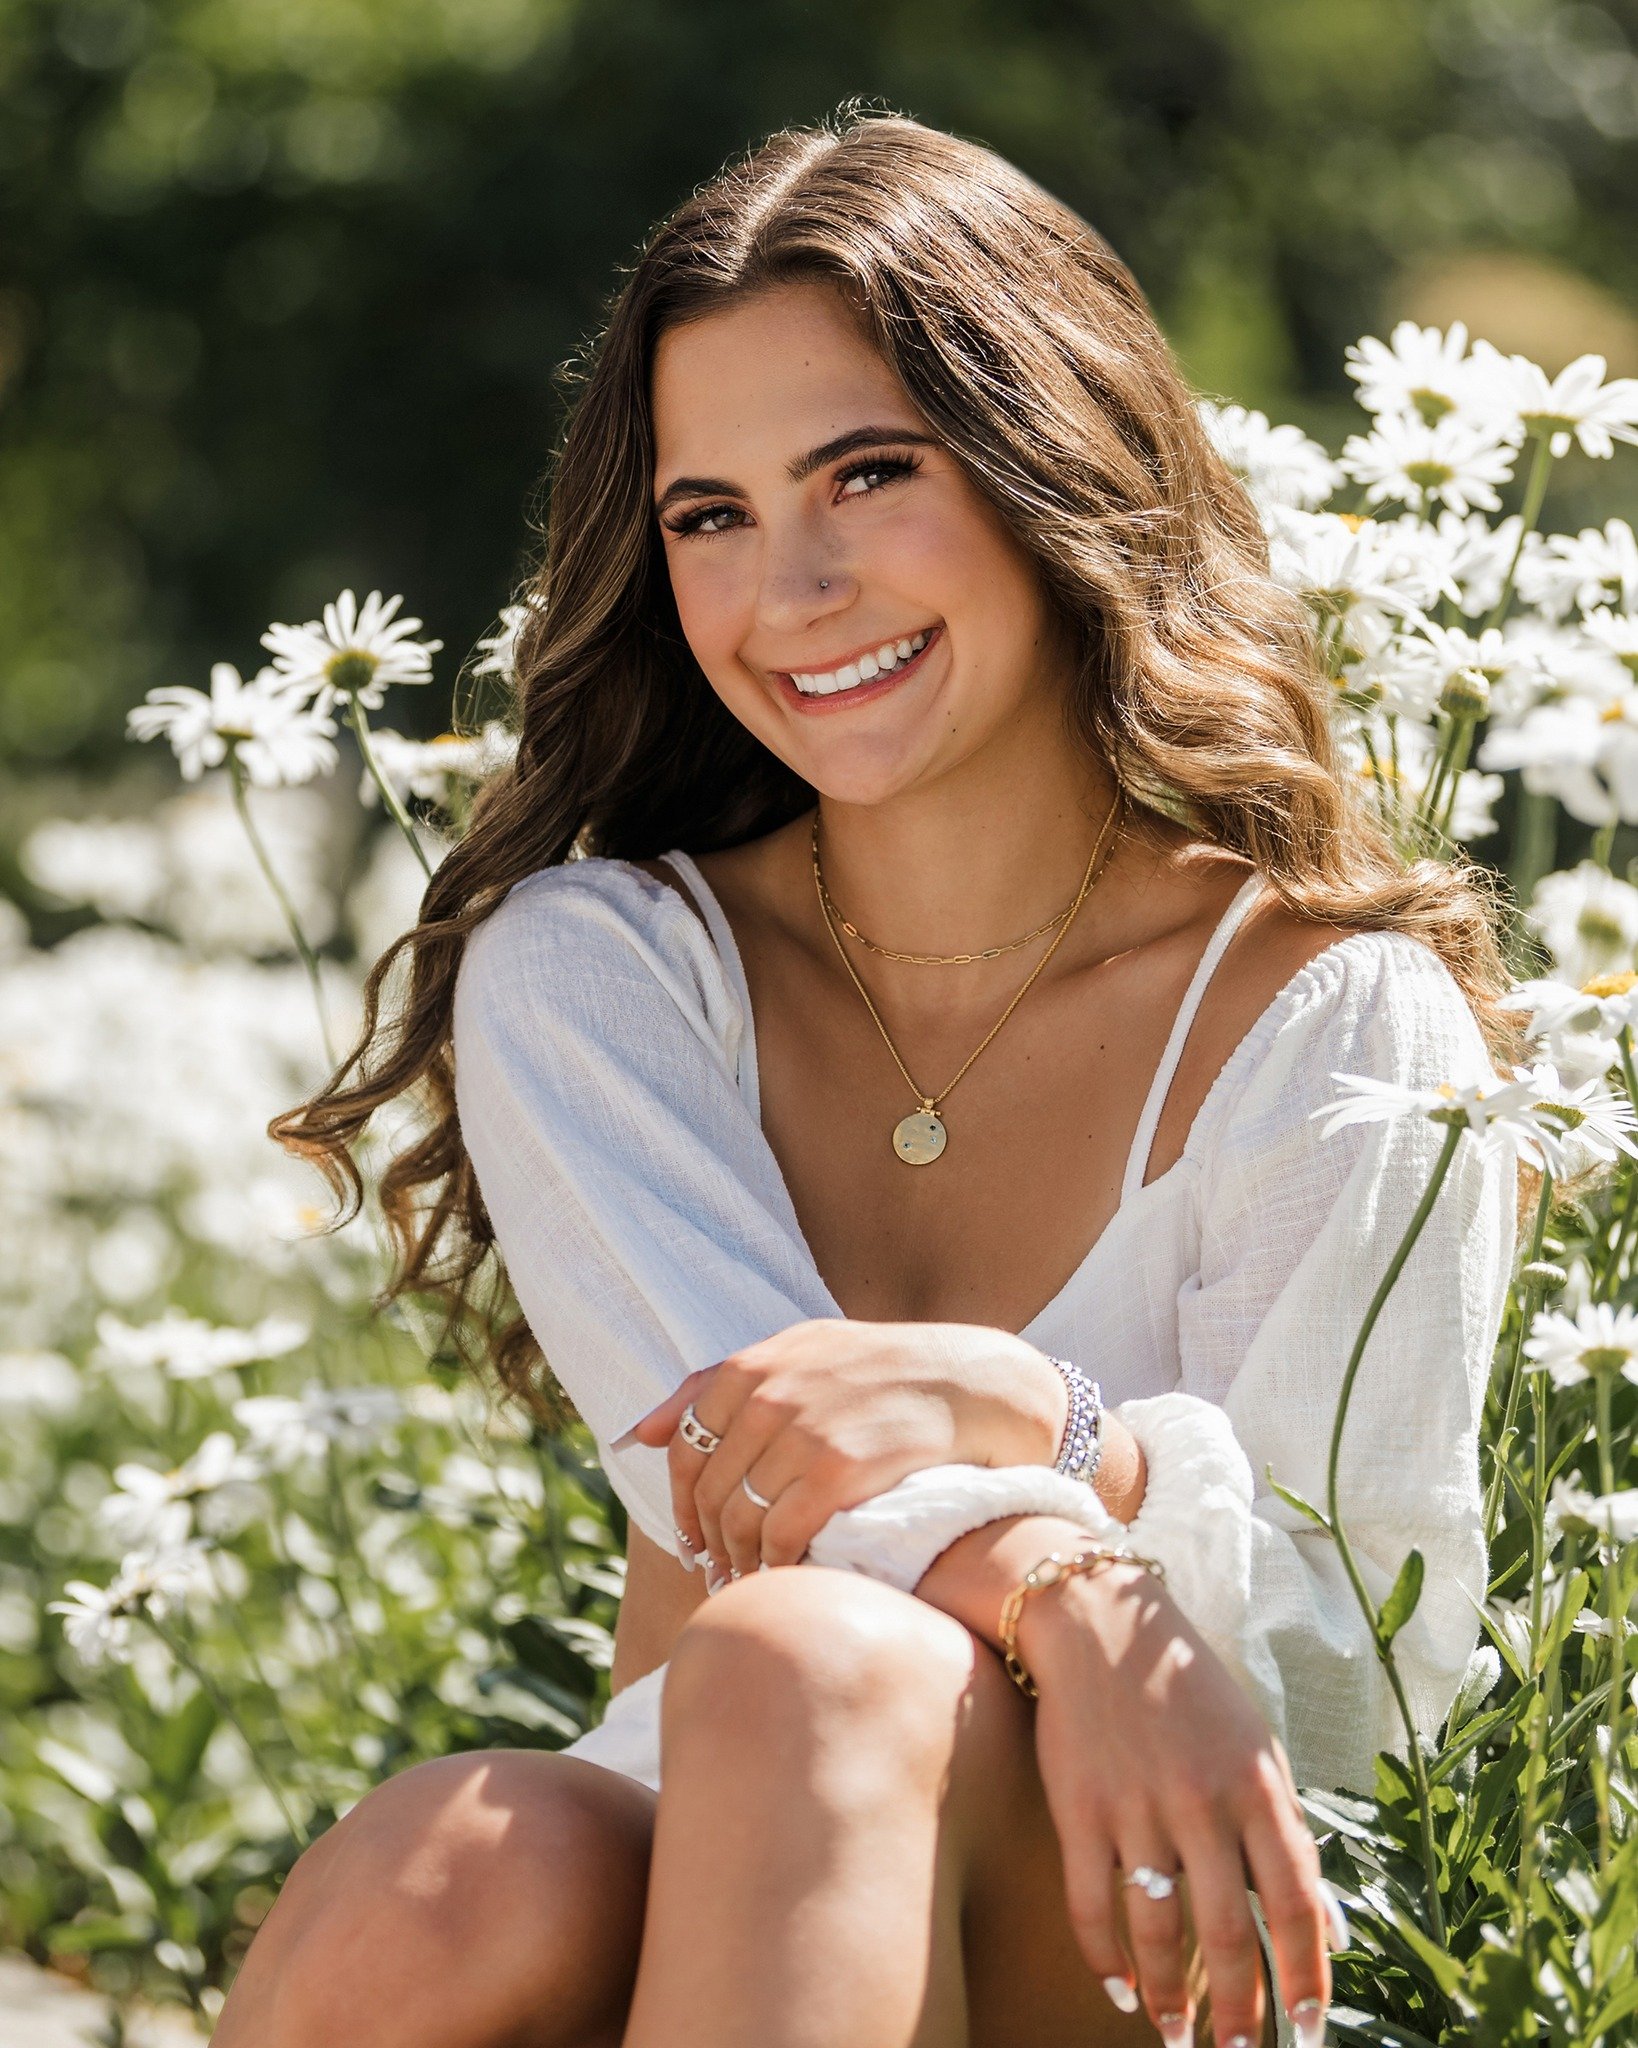 Flowers add just the right touch of whimsical to Senior Pictures...one of the many reasons why we love the Spring and Summer portrait season! 🌸 

Book online today - link in bio to reserve your date and time!

#studiobsenior #studiobgirls #studiobpo